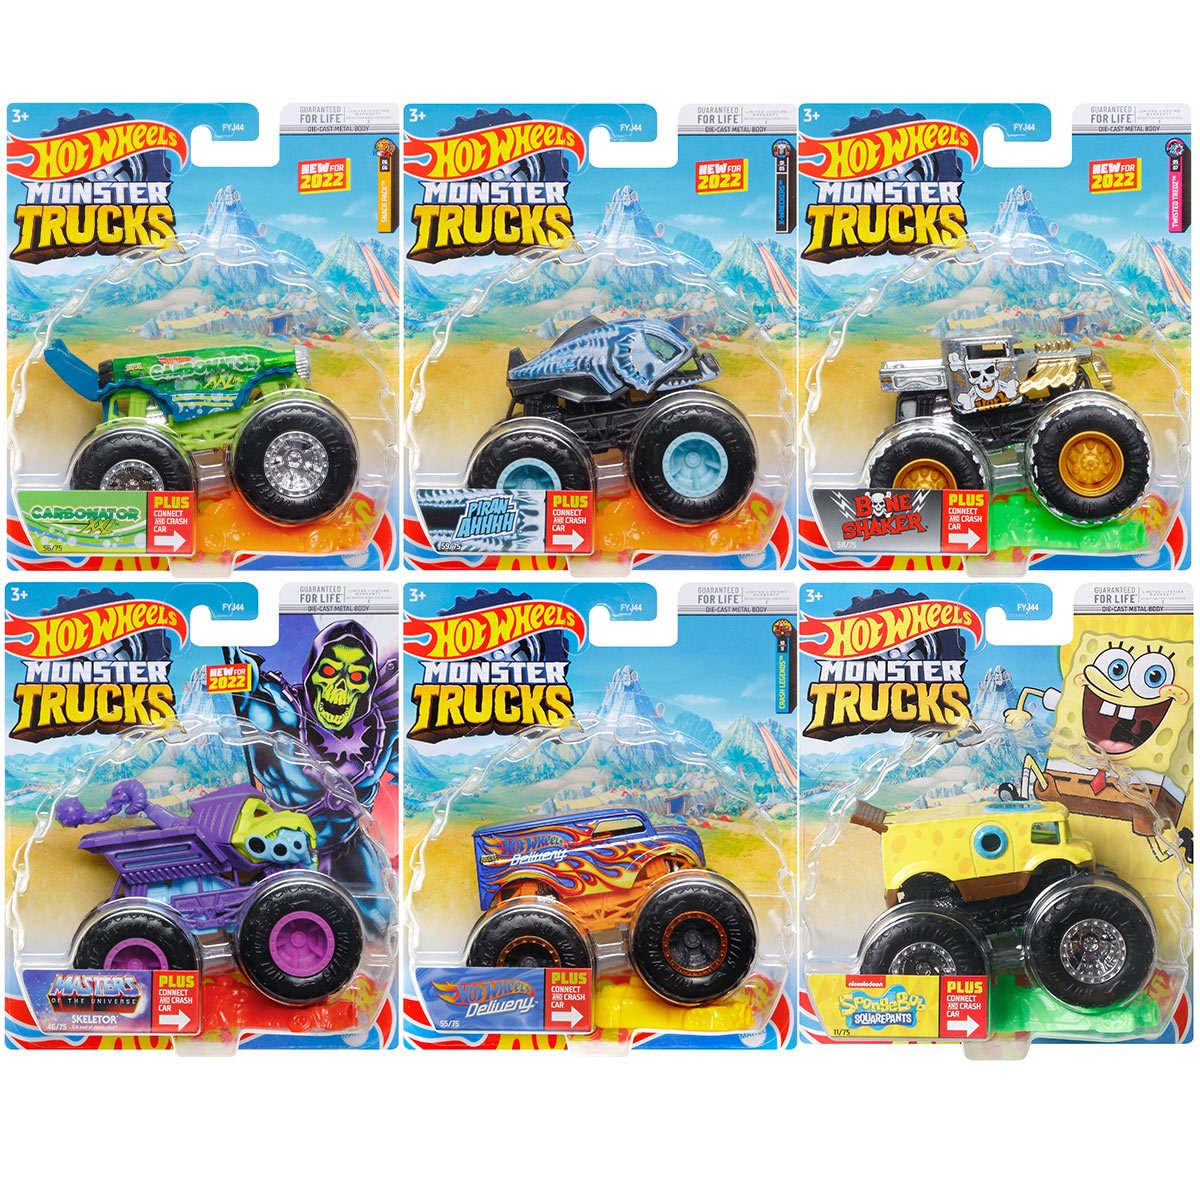 Hot Wheels Monster Trucks Live 8-Pack of Toy Trucks in 1:64 Scale